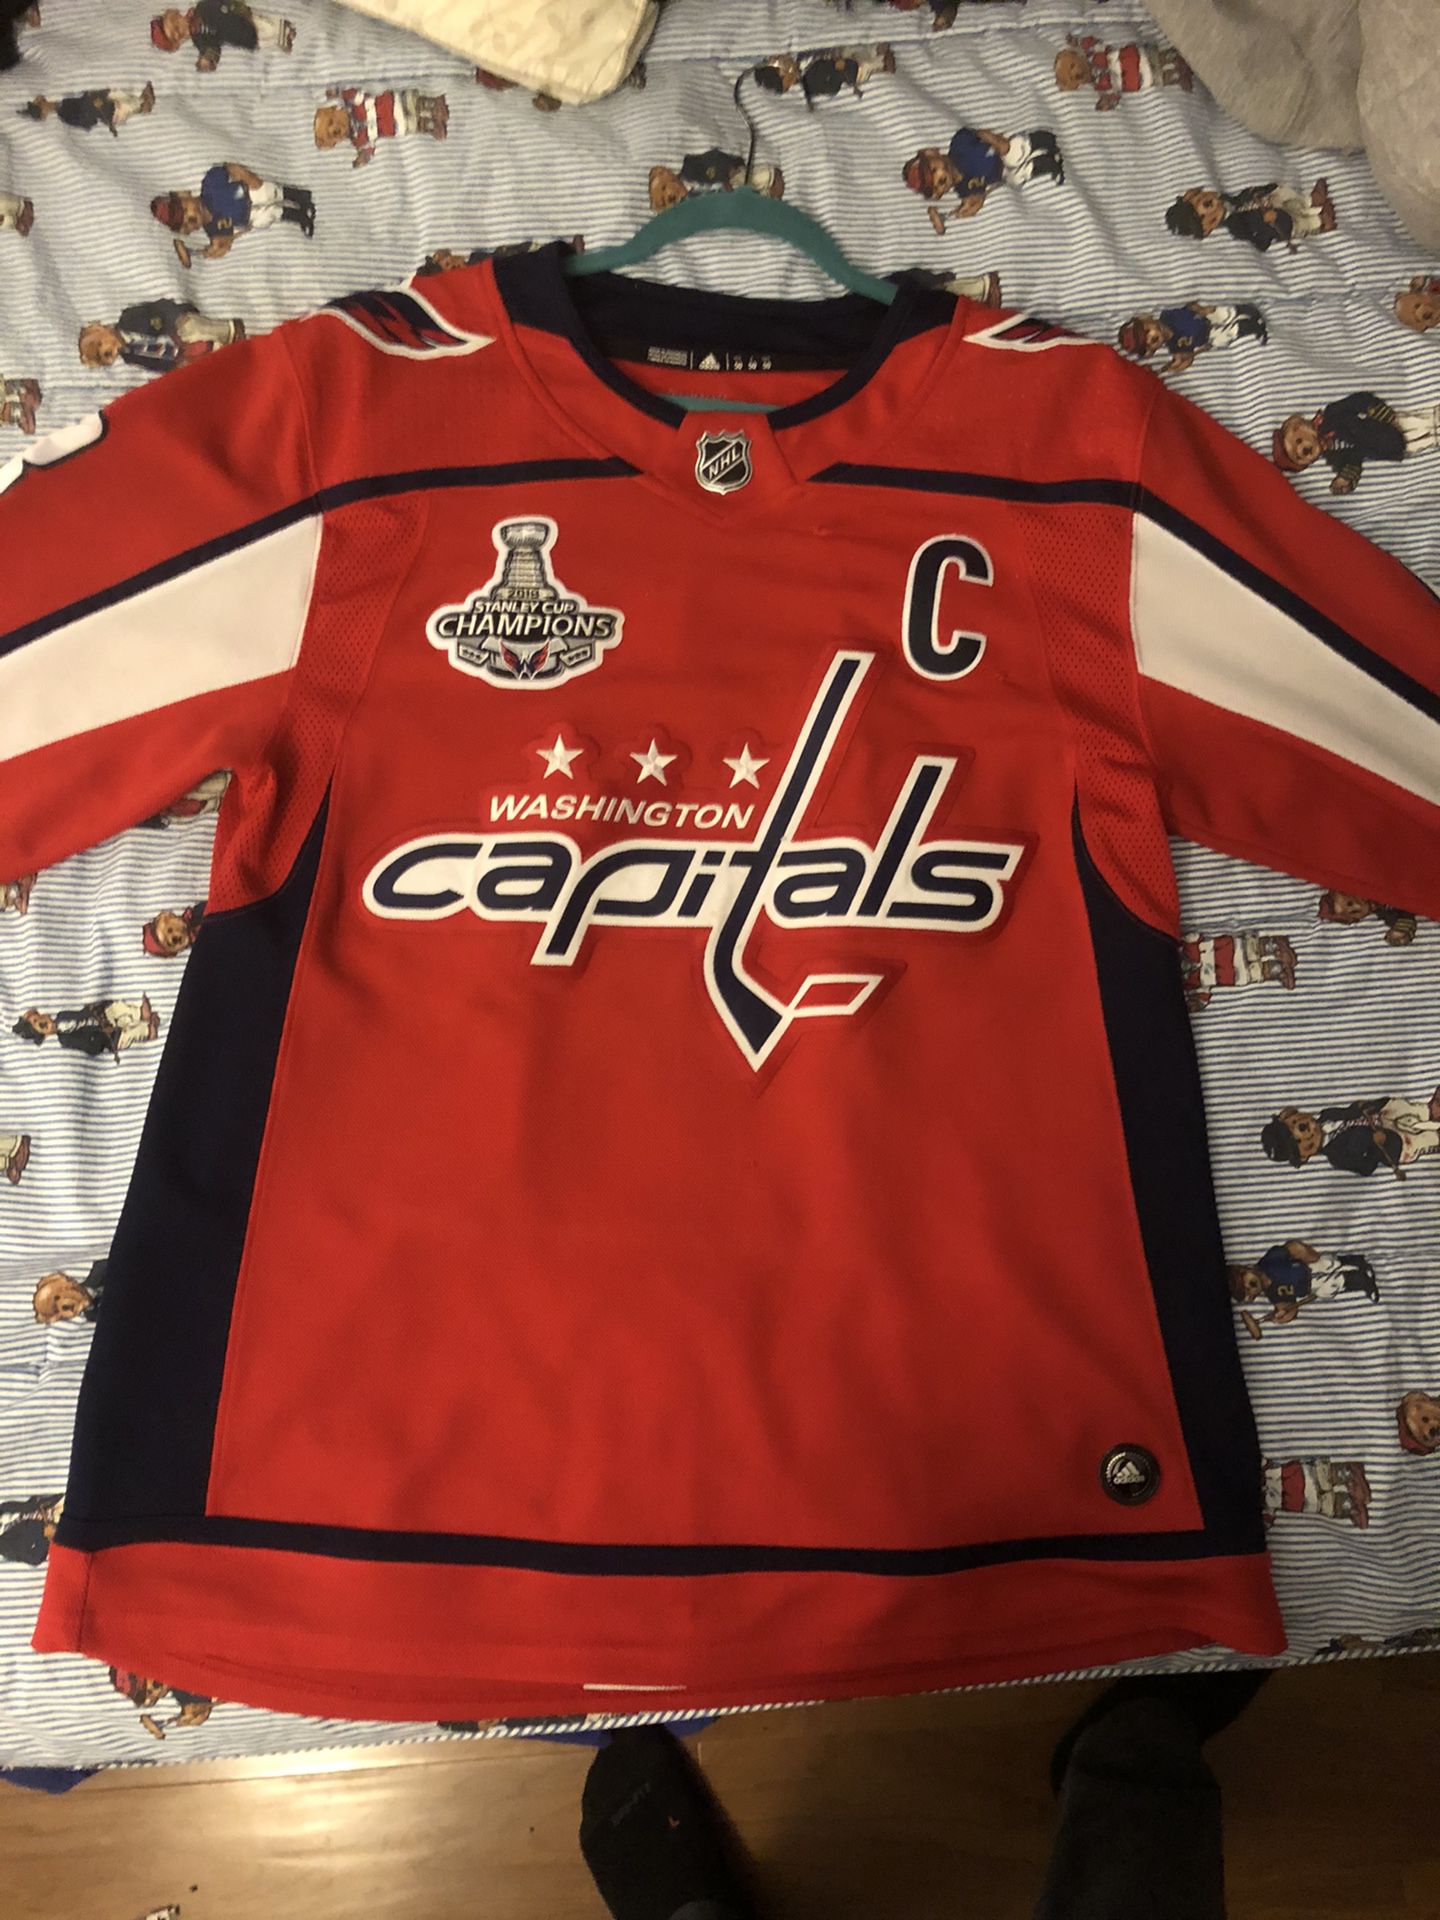 Washington Capitals 2018 Stanley Cup Champions Edition Ovechkin Jersey